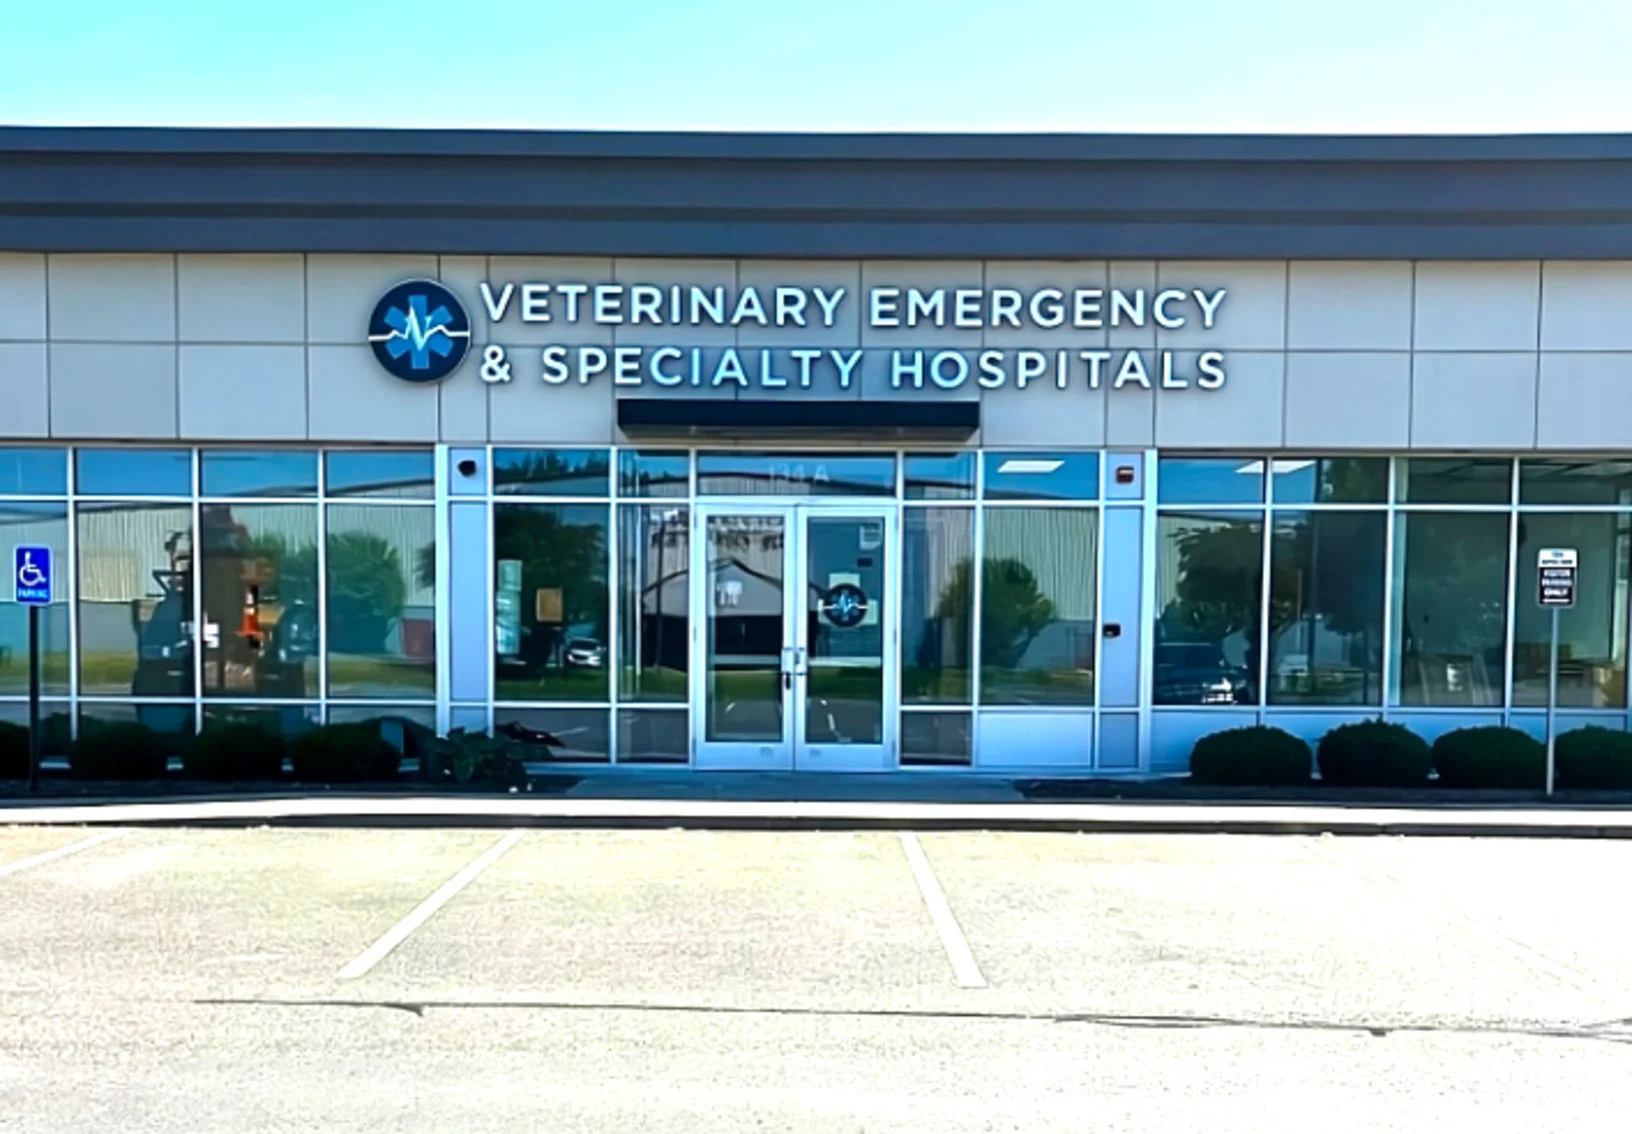 Exterior view of Veterinary Emergency Specialty Hospitals